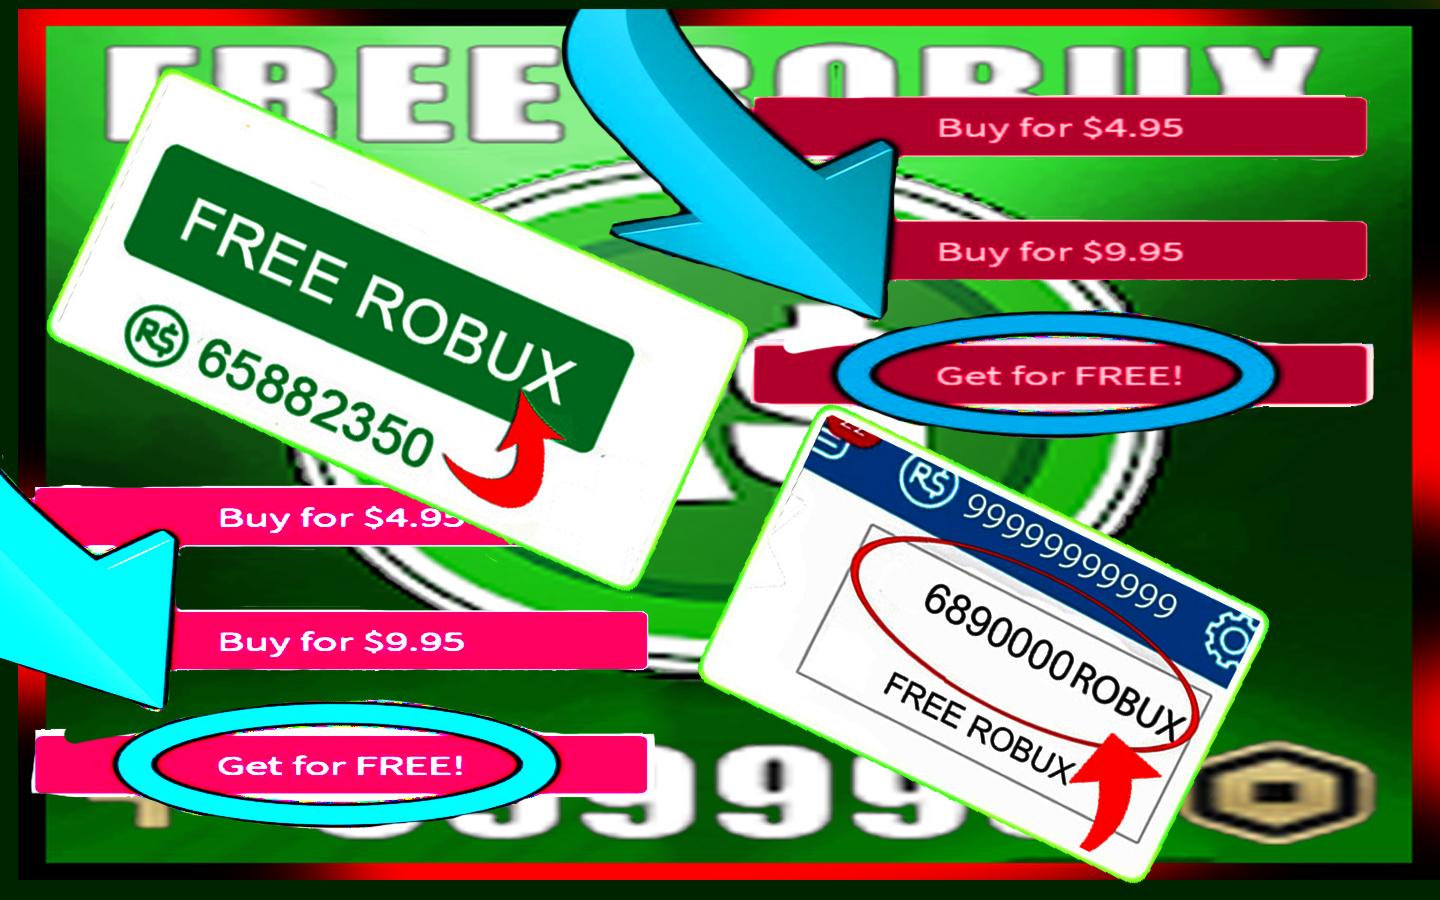 Free Robux Pro Master Robux Tips 2020 For Android Apk Download - get free robux pro for roblox apk download apkpure com